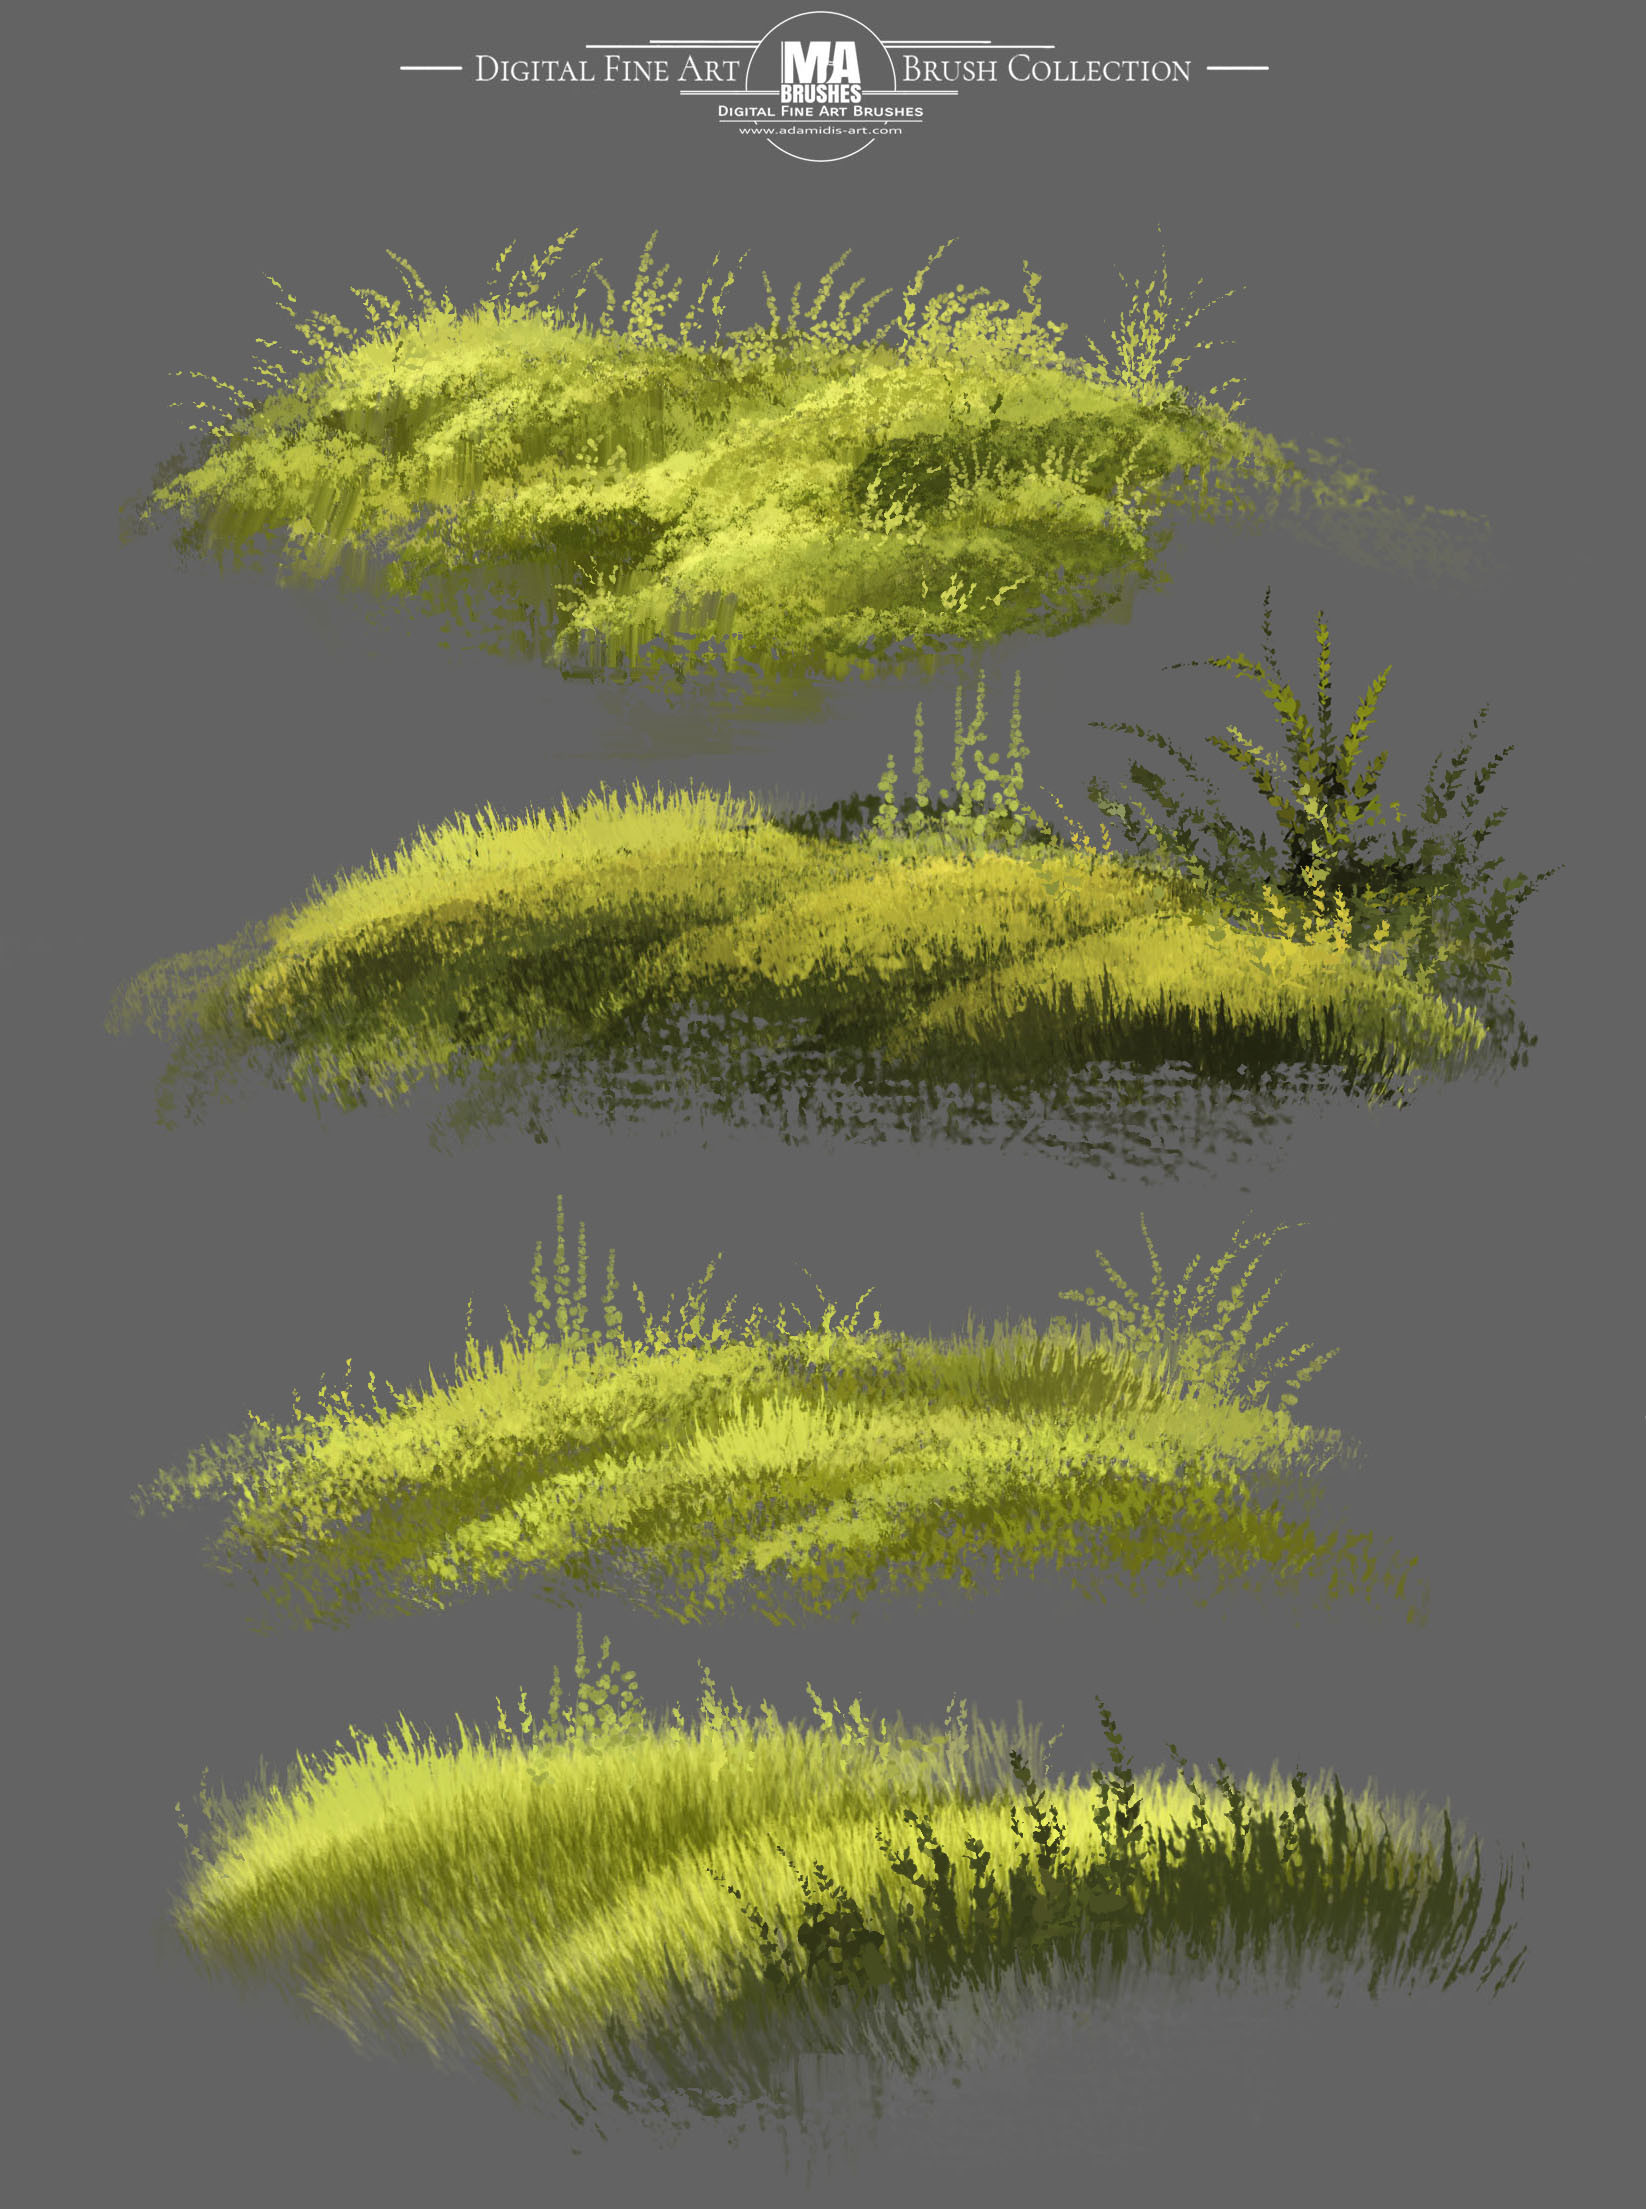 Concept Art and Photoshop Brushes - MA-Brush example of different Grass